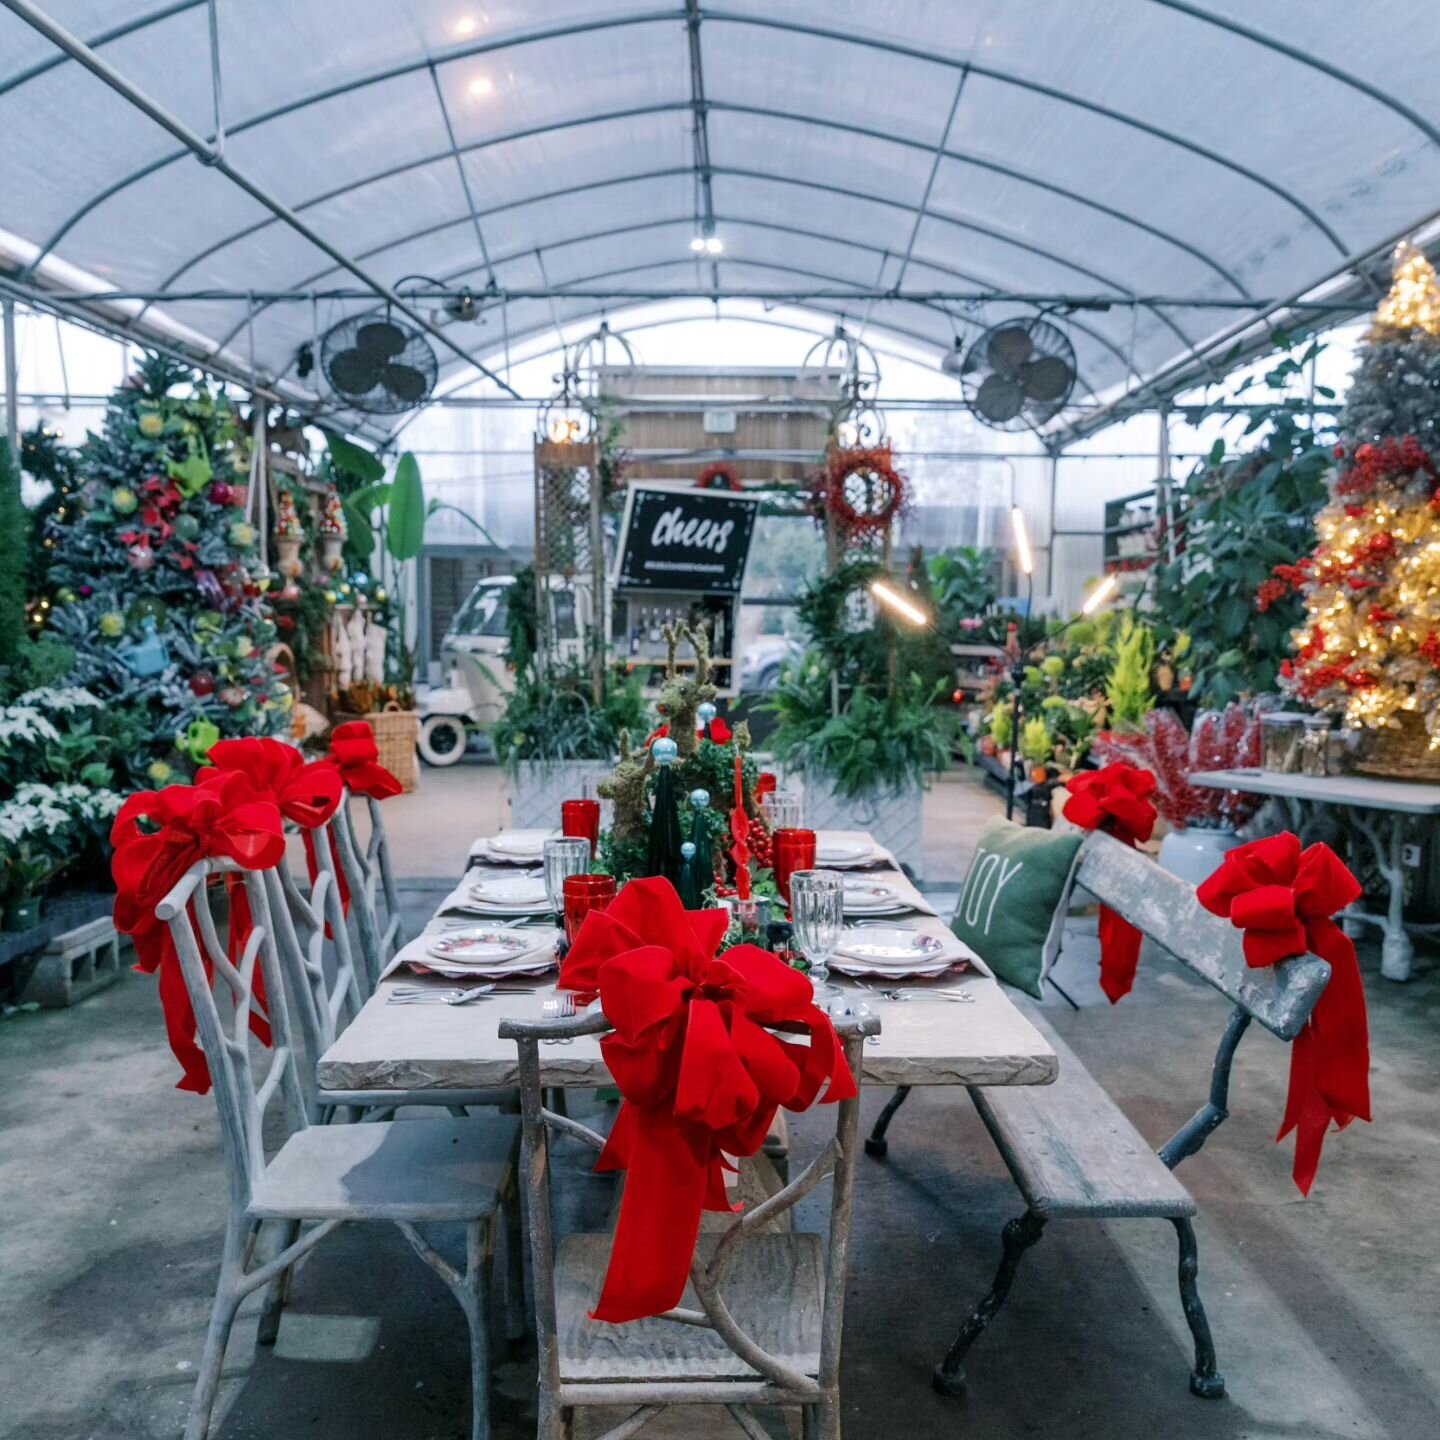 Penny's Christmas Vibes, Sooo whimsical!!! Enjoyed our time with you @walkinginmemphisinhighheels. 

Planning a small dinner with family and friends??? 

@marykatesteele - photography
@millstonenursery - venue and centerpiece styling
@feastandgraze -